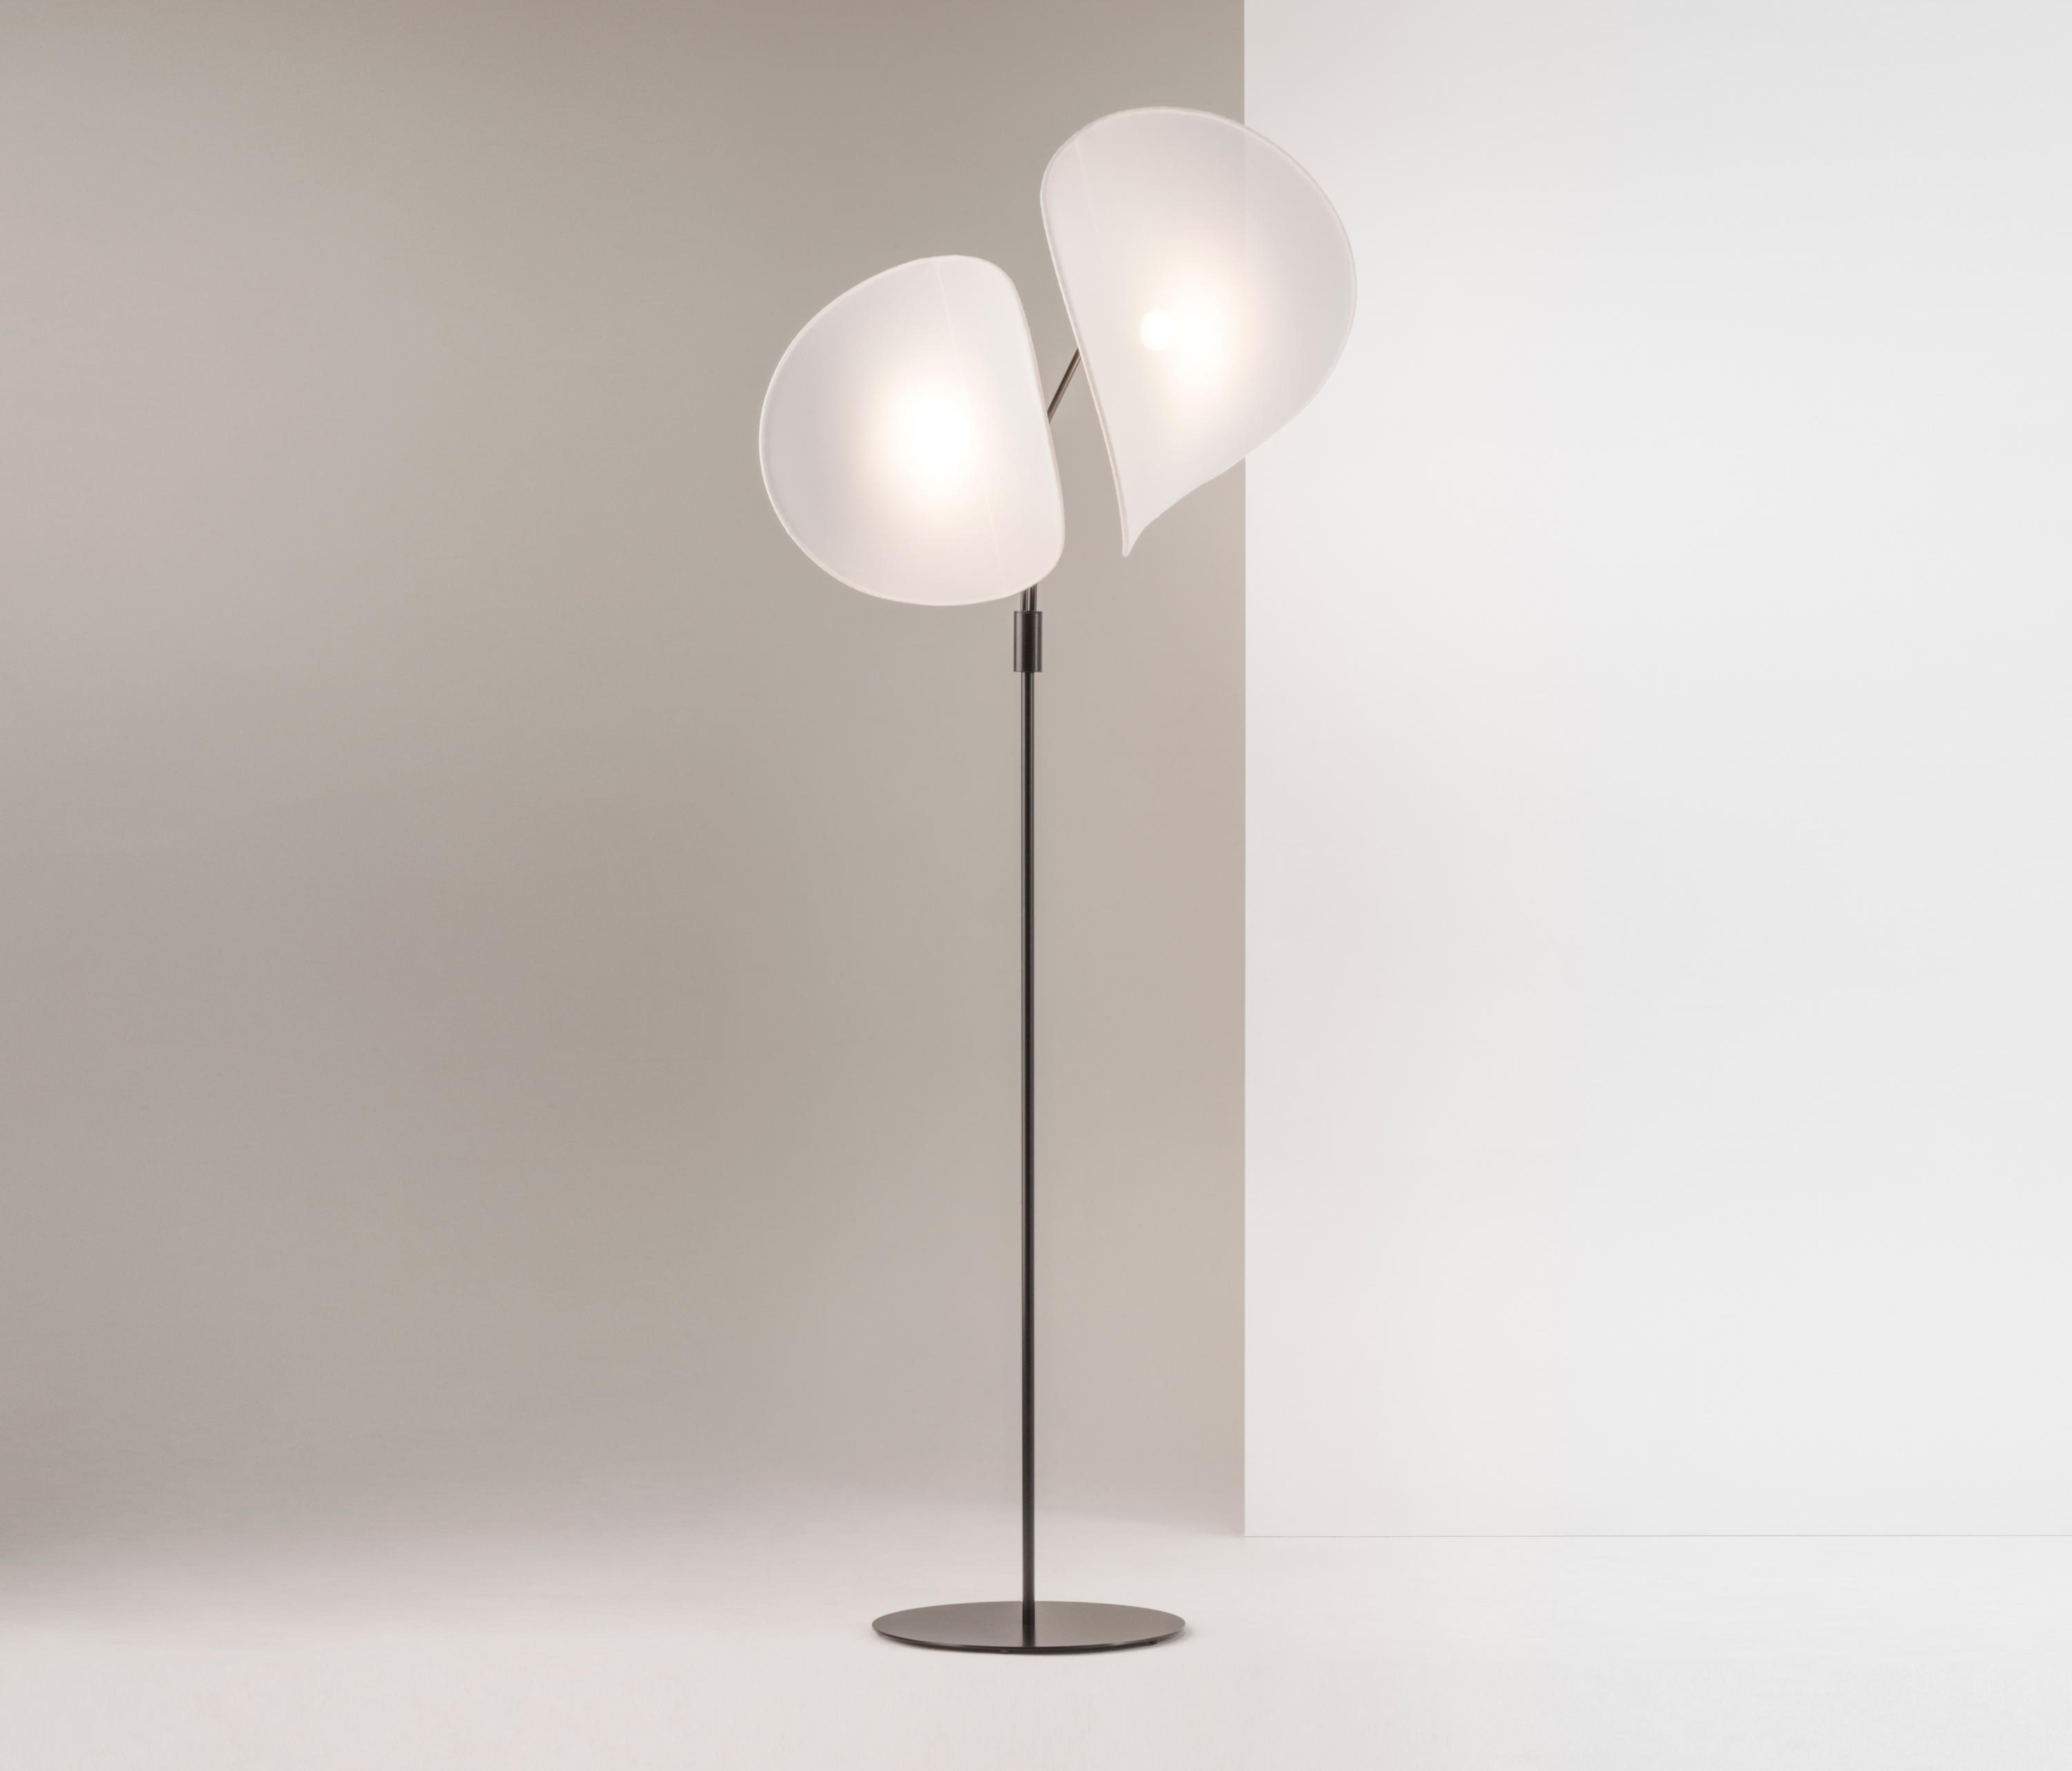 Manta Floor Lamp Designermbel Architonic intended for size 3000 X 2564